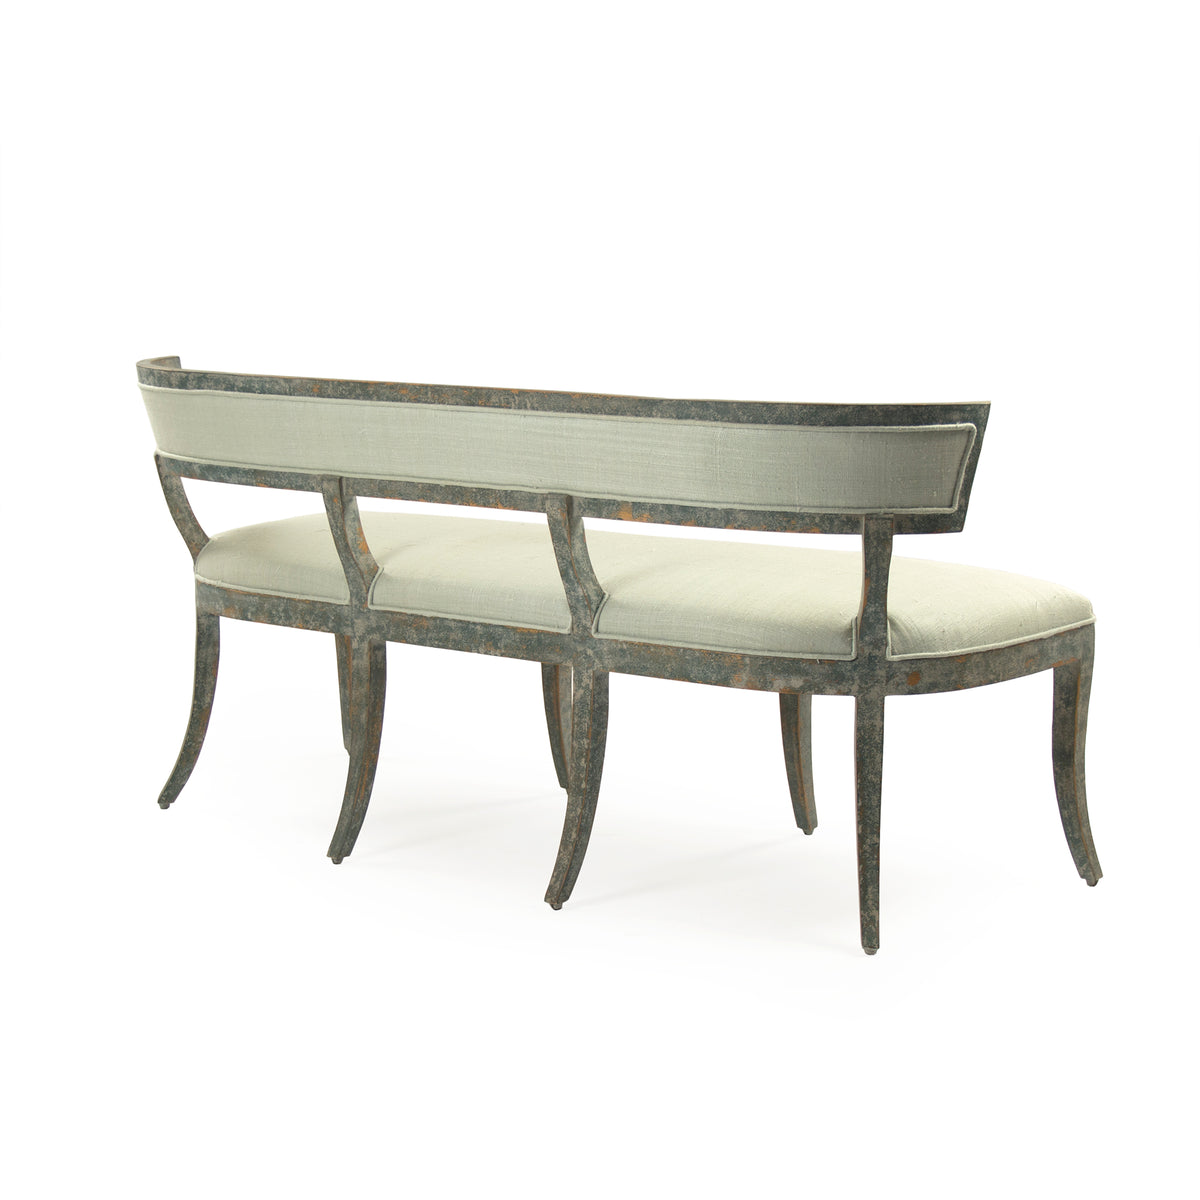 Lorand Bench by Zentique